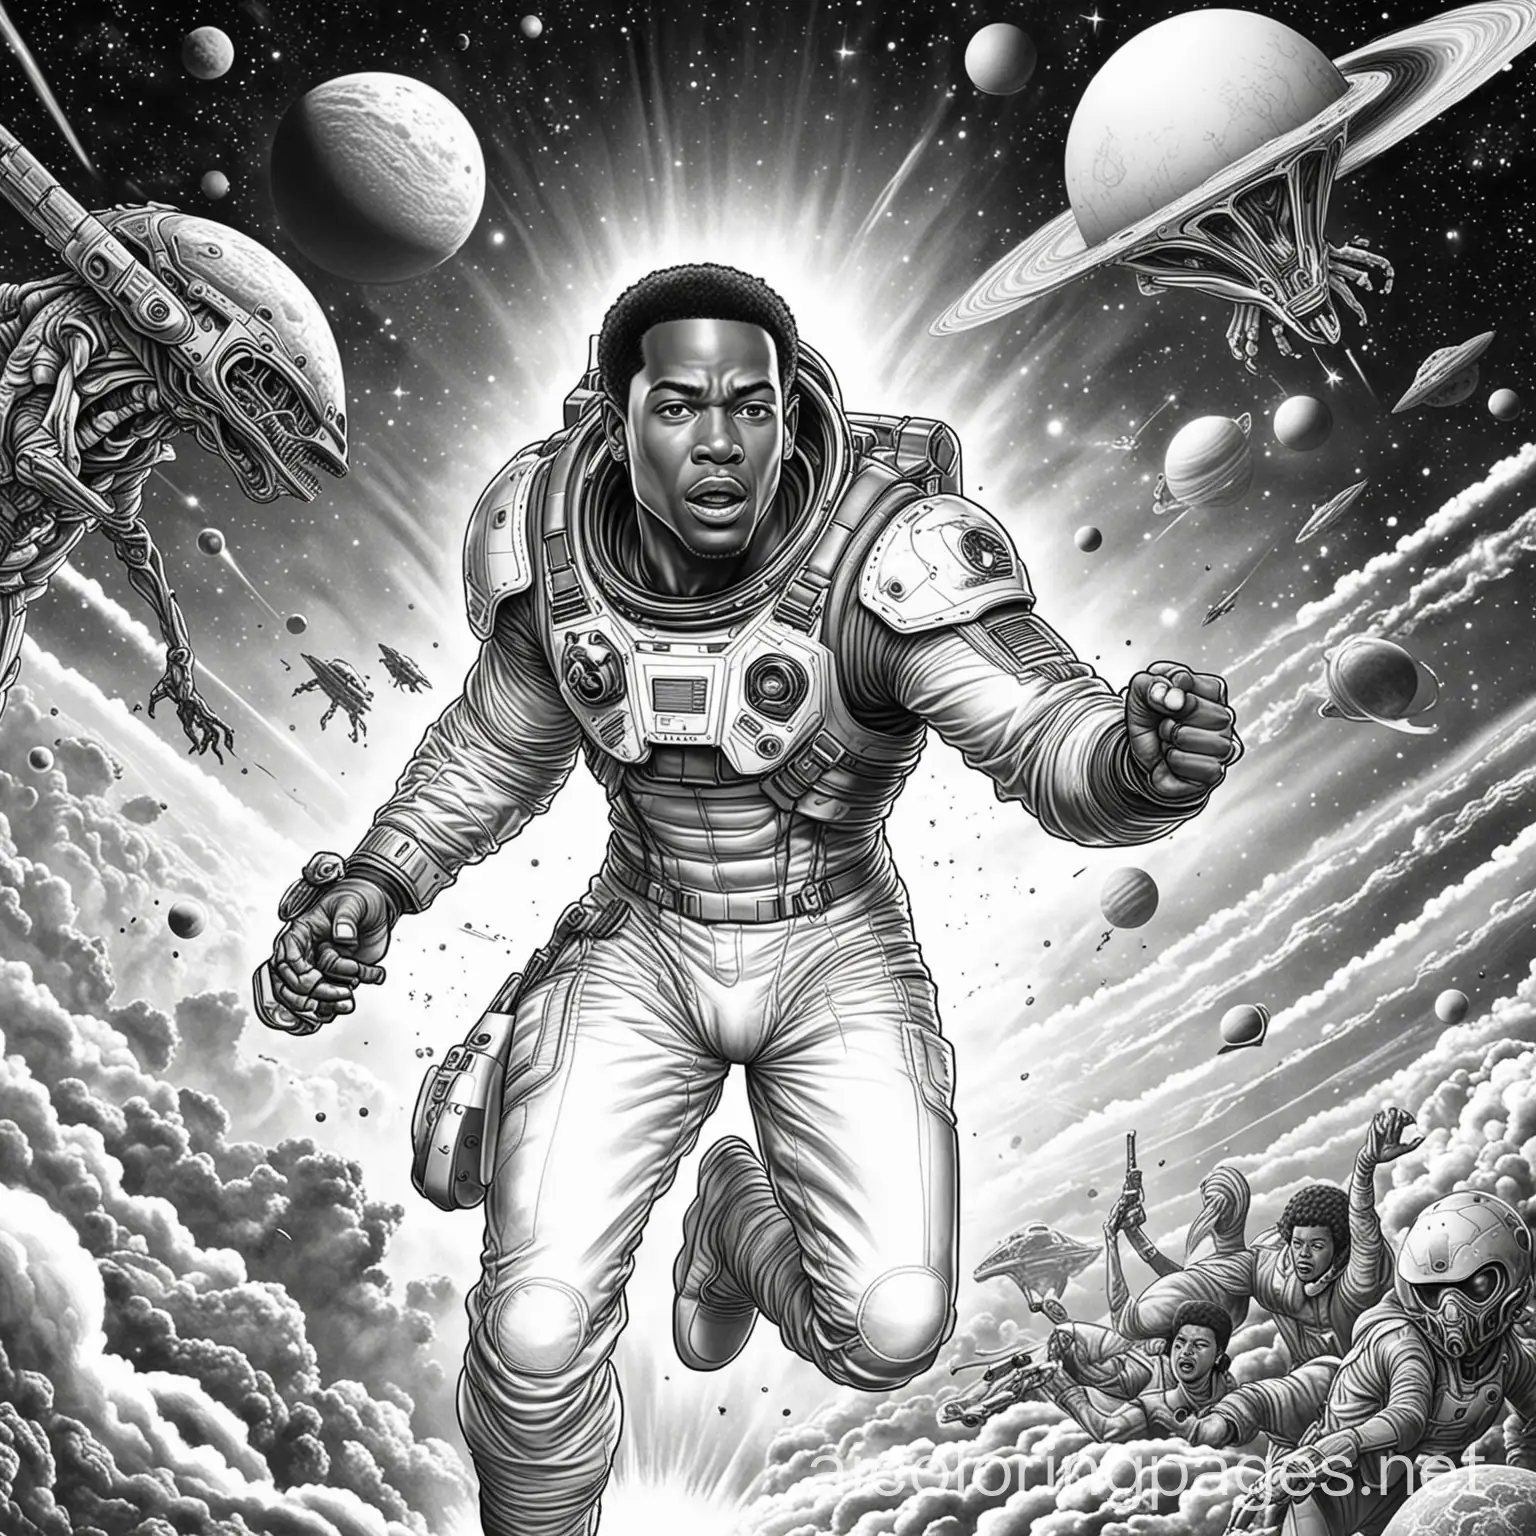 a african american adult male fighting aliens in space, Coloring Page, black and white, line art, white background, Simplicity, Ample White Space. The background of the coloring page is plain white to make it easy for young children to color within the lines. The outlines of all the subjects are easy to distinguish, making it simple for kids to color without too much difficulty